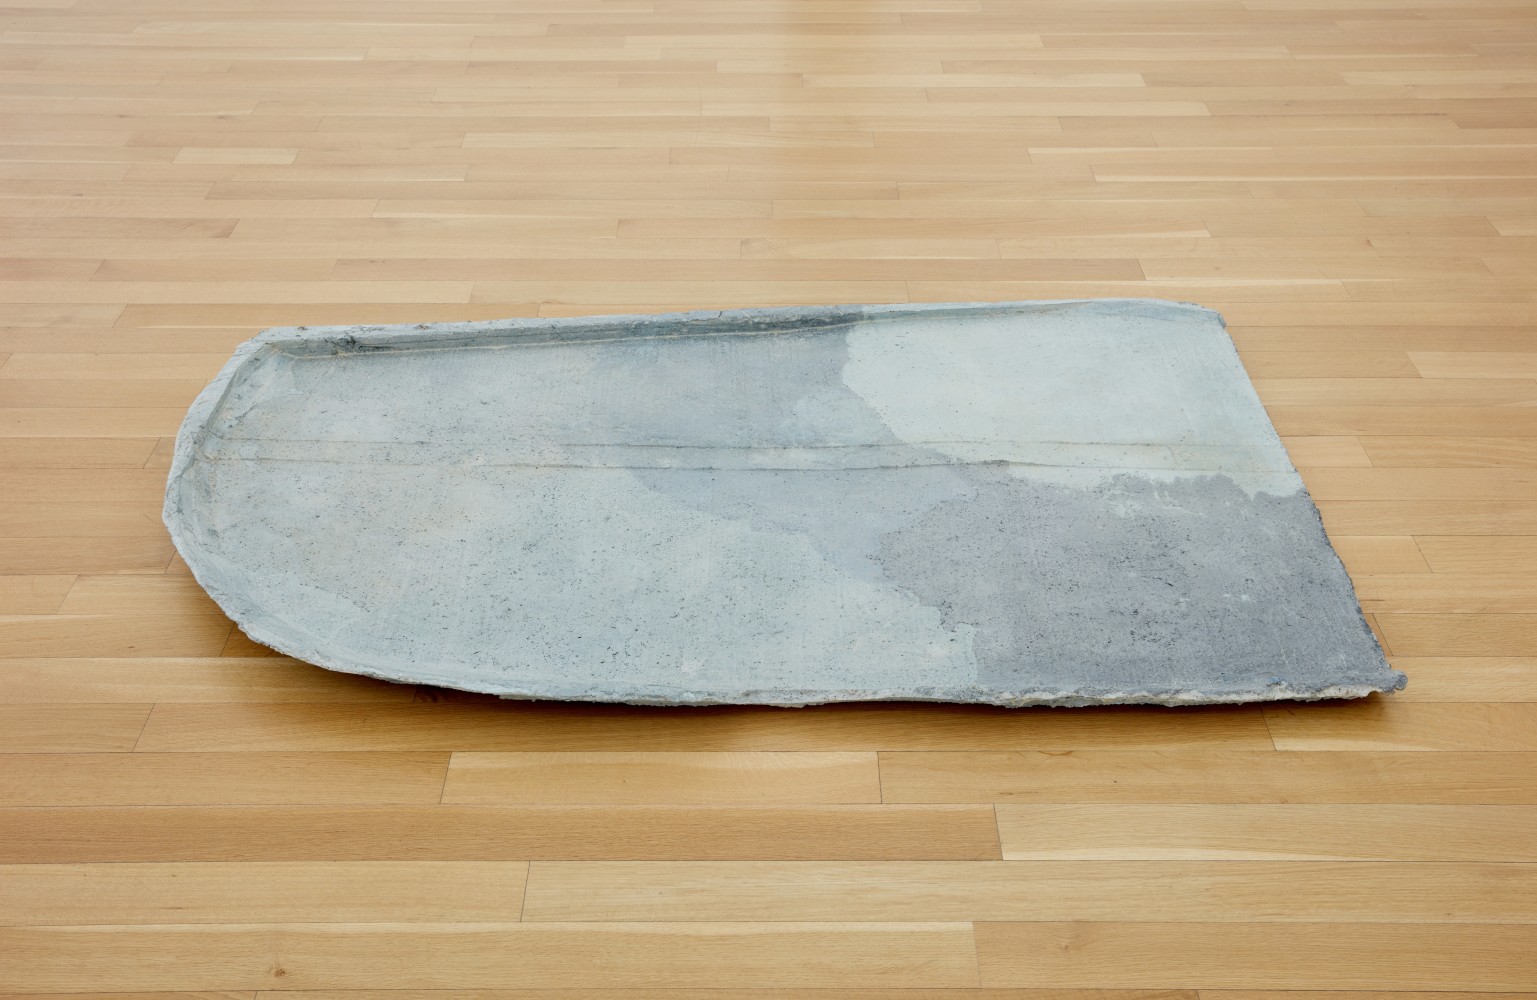 Esther Kläs About, 2019-2021 aluminum, concrete, and pigment 74 3/8 x 78 3/4 x 129 7/8 inches (189 x 200 x 330 cm), overall